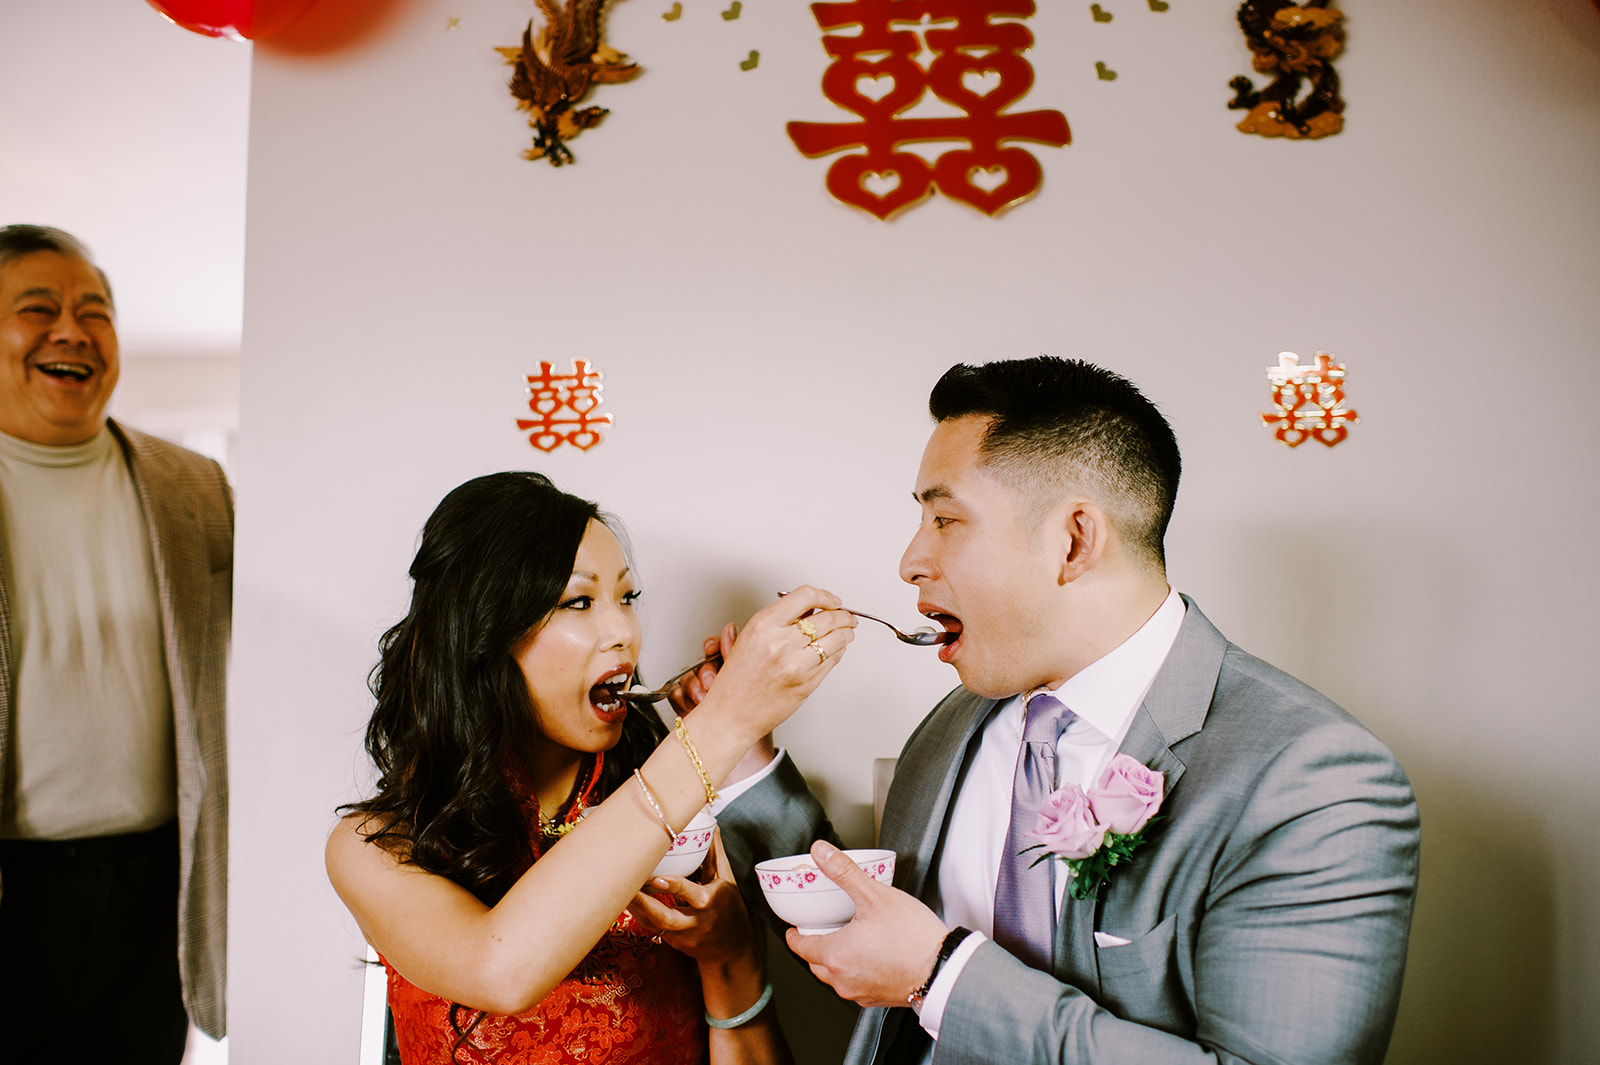 Happy couple feeding each other sweet tang yuen glutinous rice balls for luck Chinese wedding tea ceremony